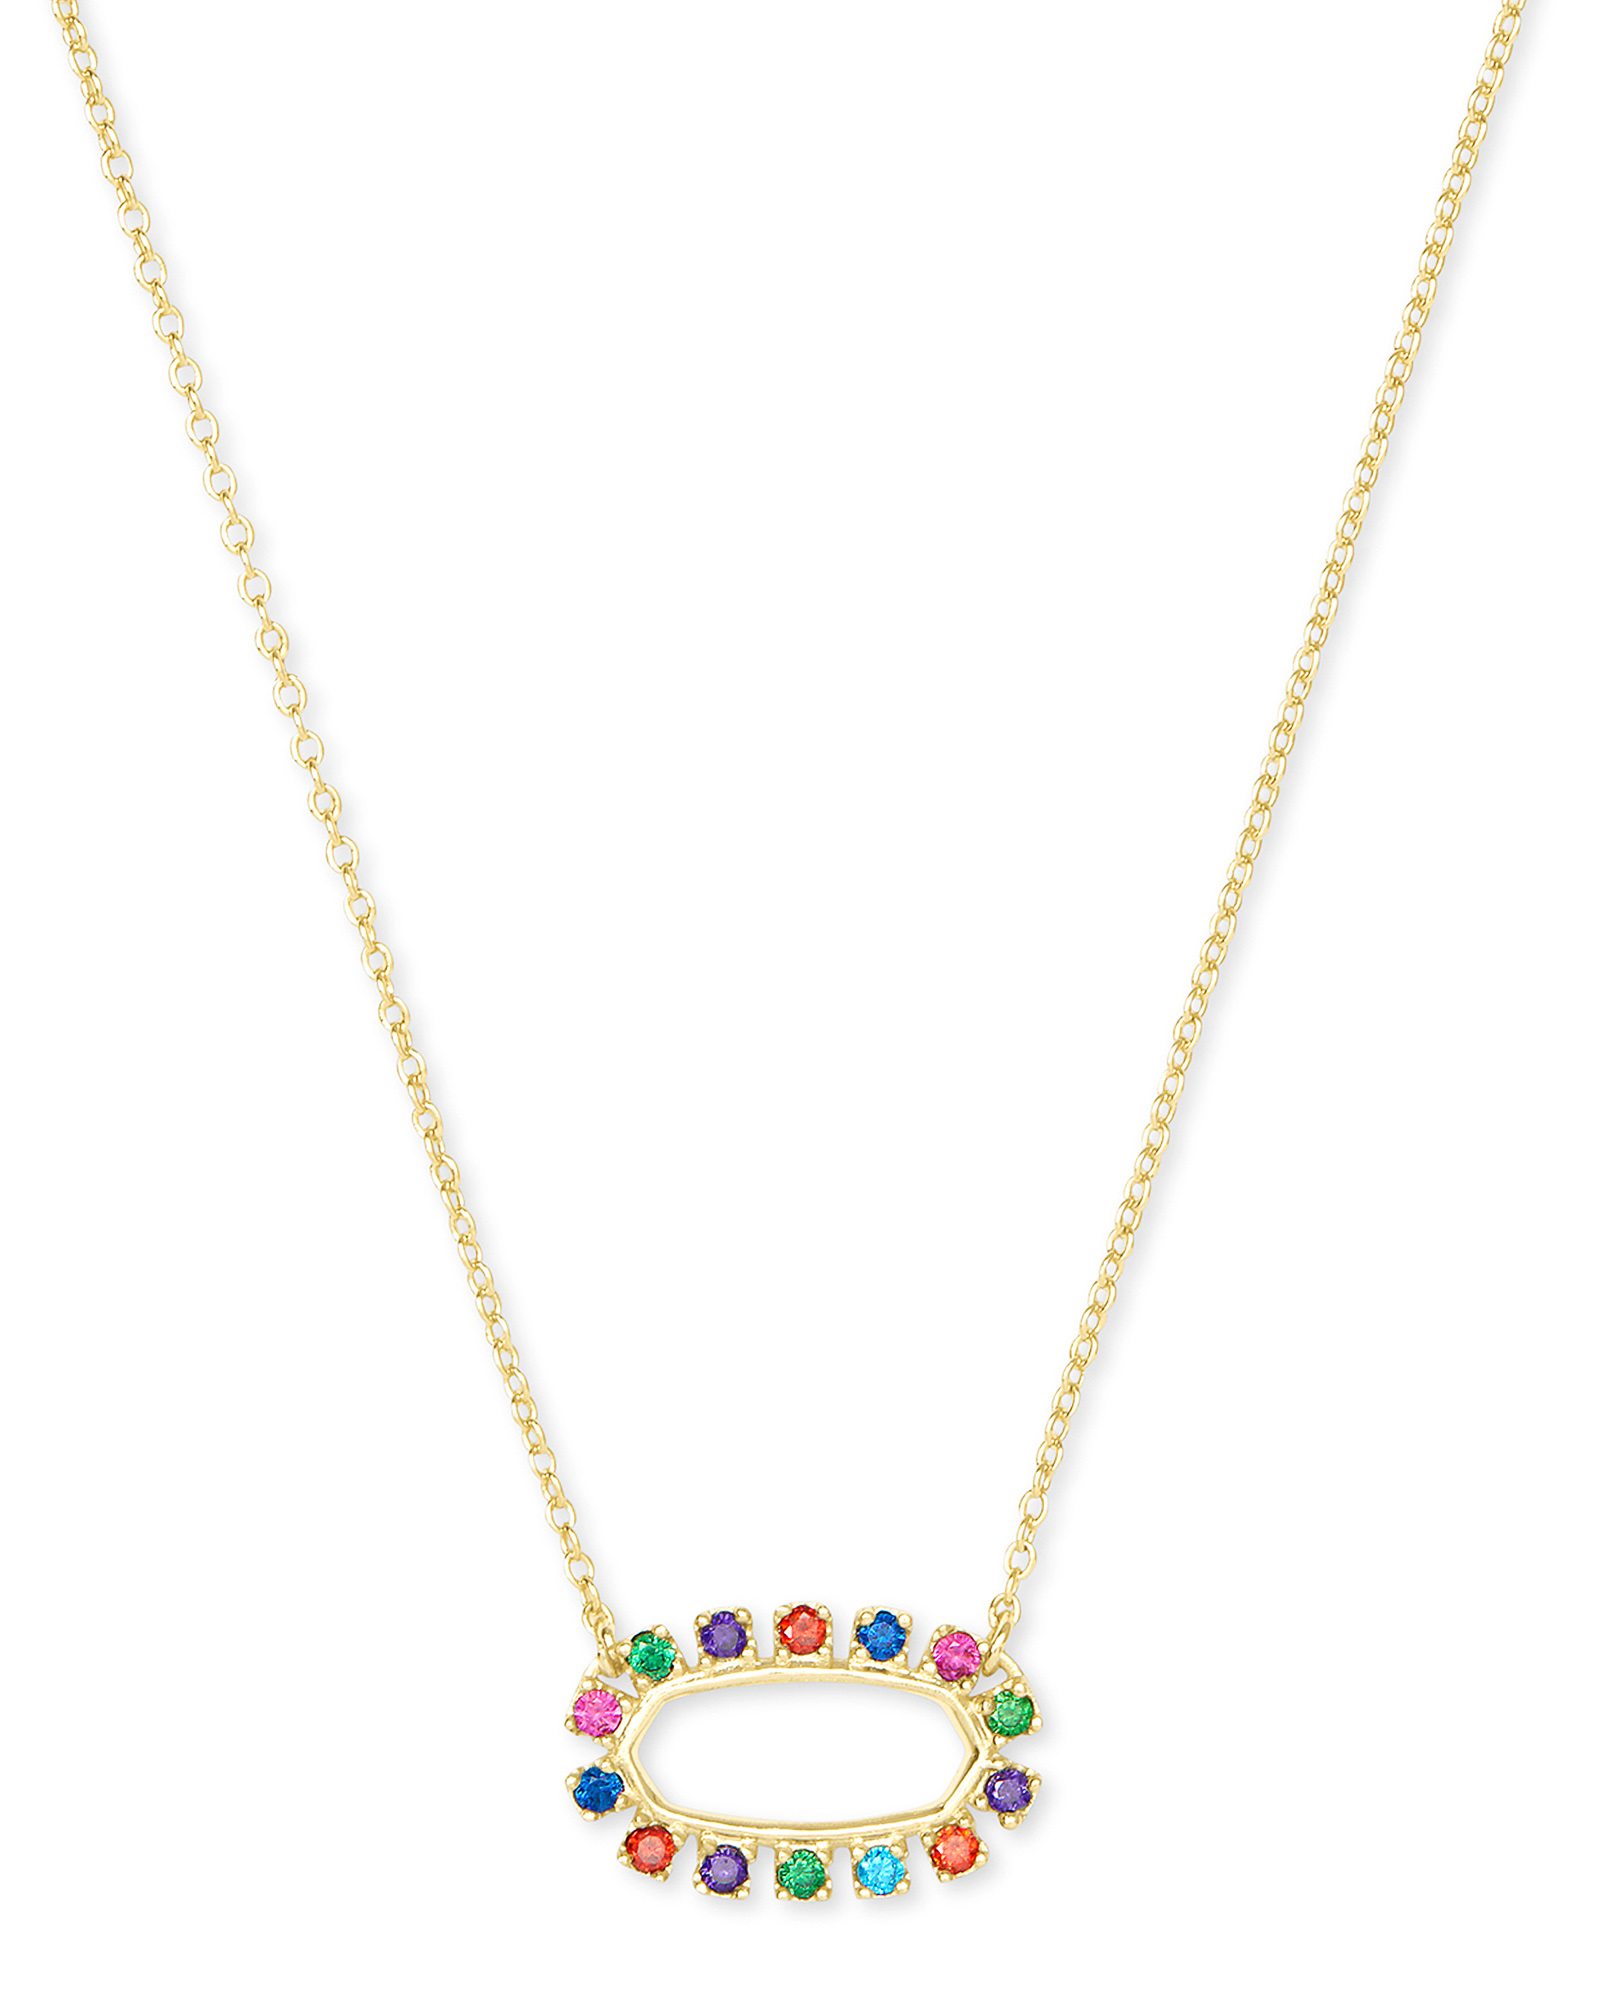 Kendra Scott - March, it's your birthday! What better way to use your Kendra  Scott birthday discount than on our NEW birthstone necklaces? 🥳 With your  KS birthday discount you can score...